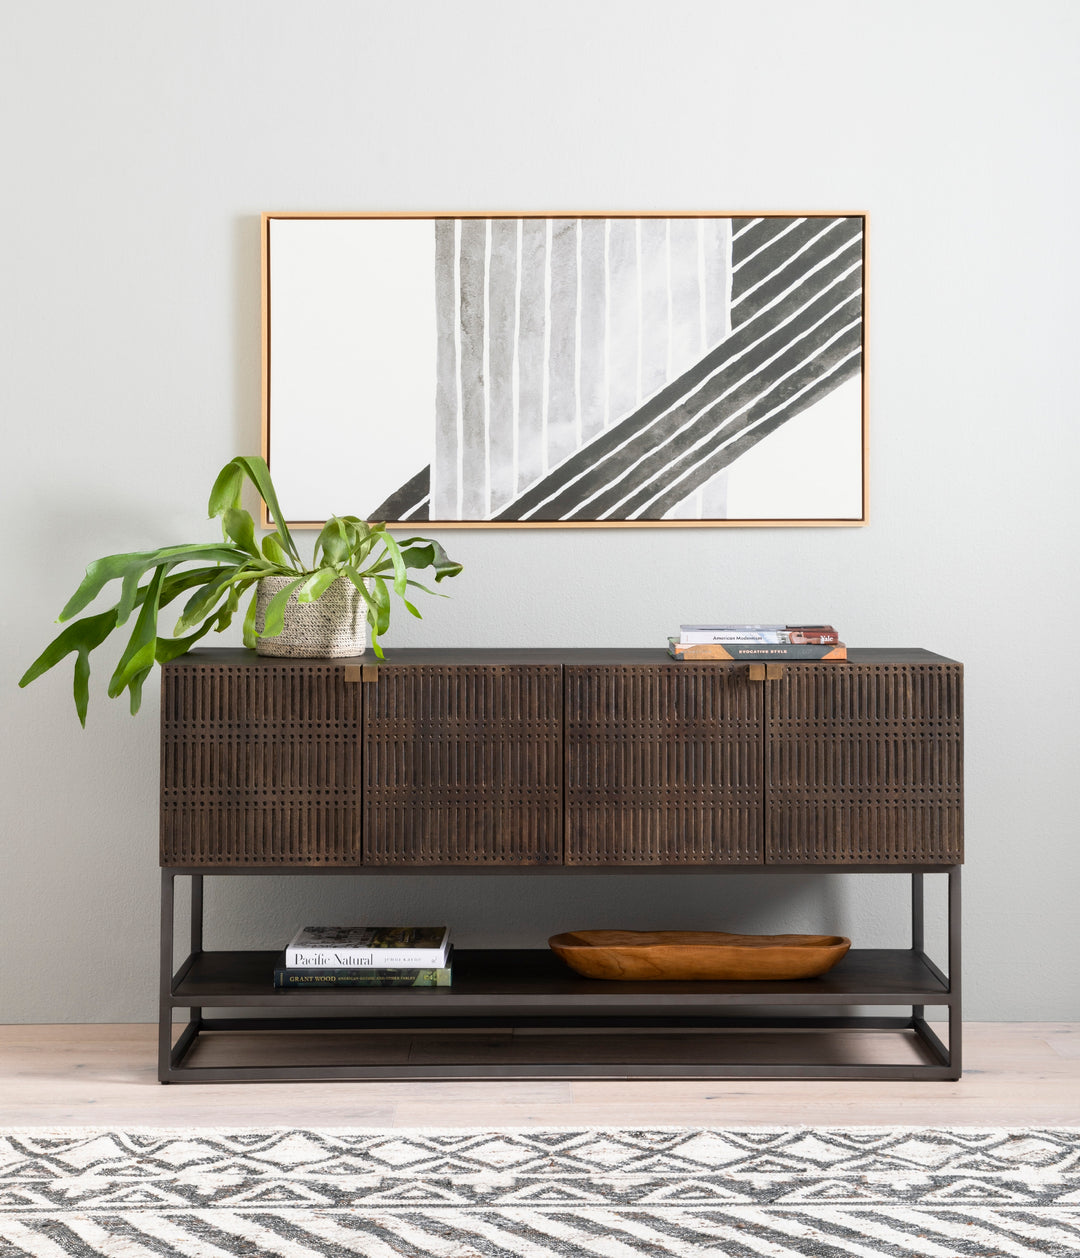 Charlie Small Media Console - Vintage Brown